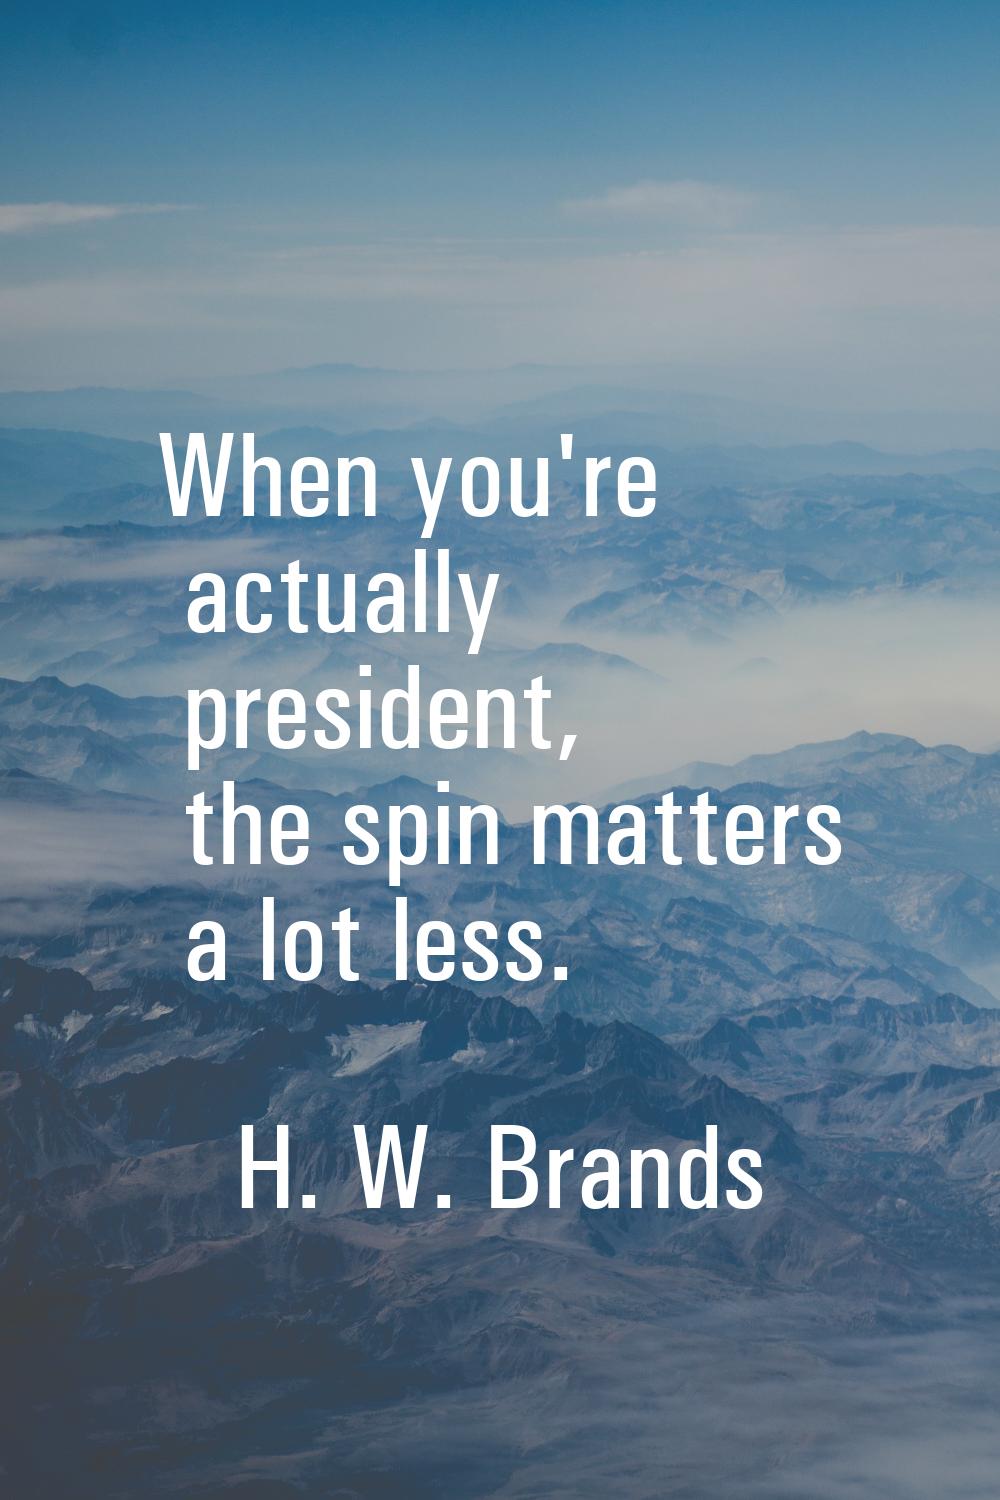 When you're actually president, the spin matters a lot less.